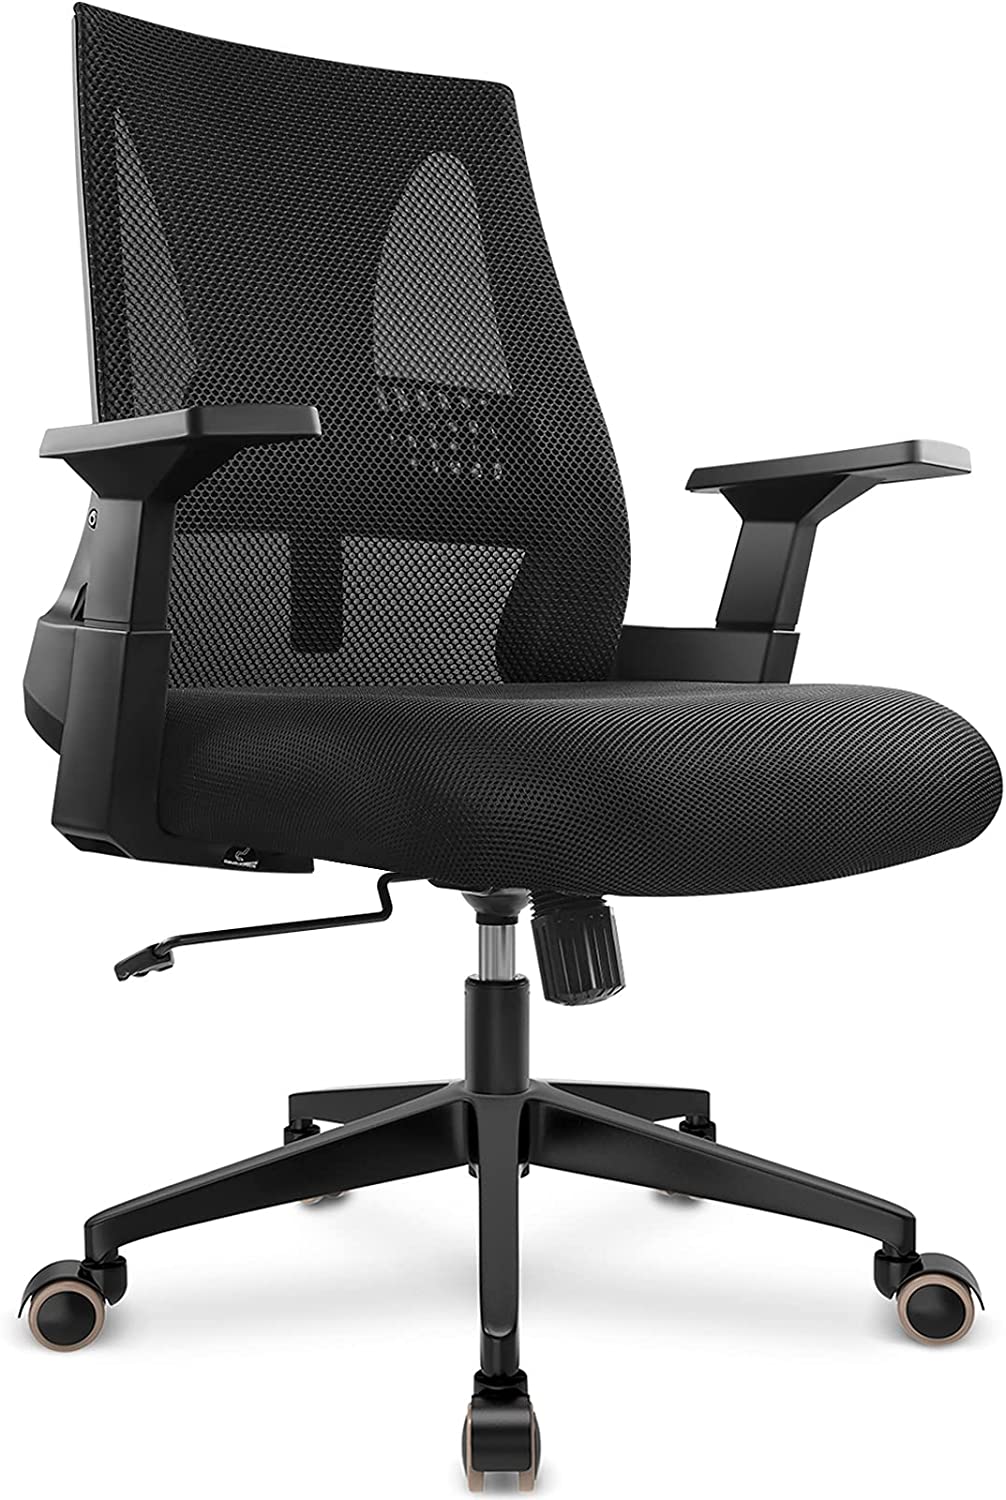 Review of Ergonomic Office Chair - 400Lbs Capacity